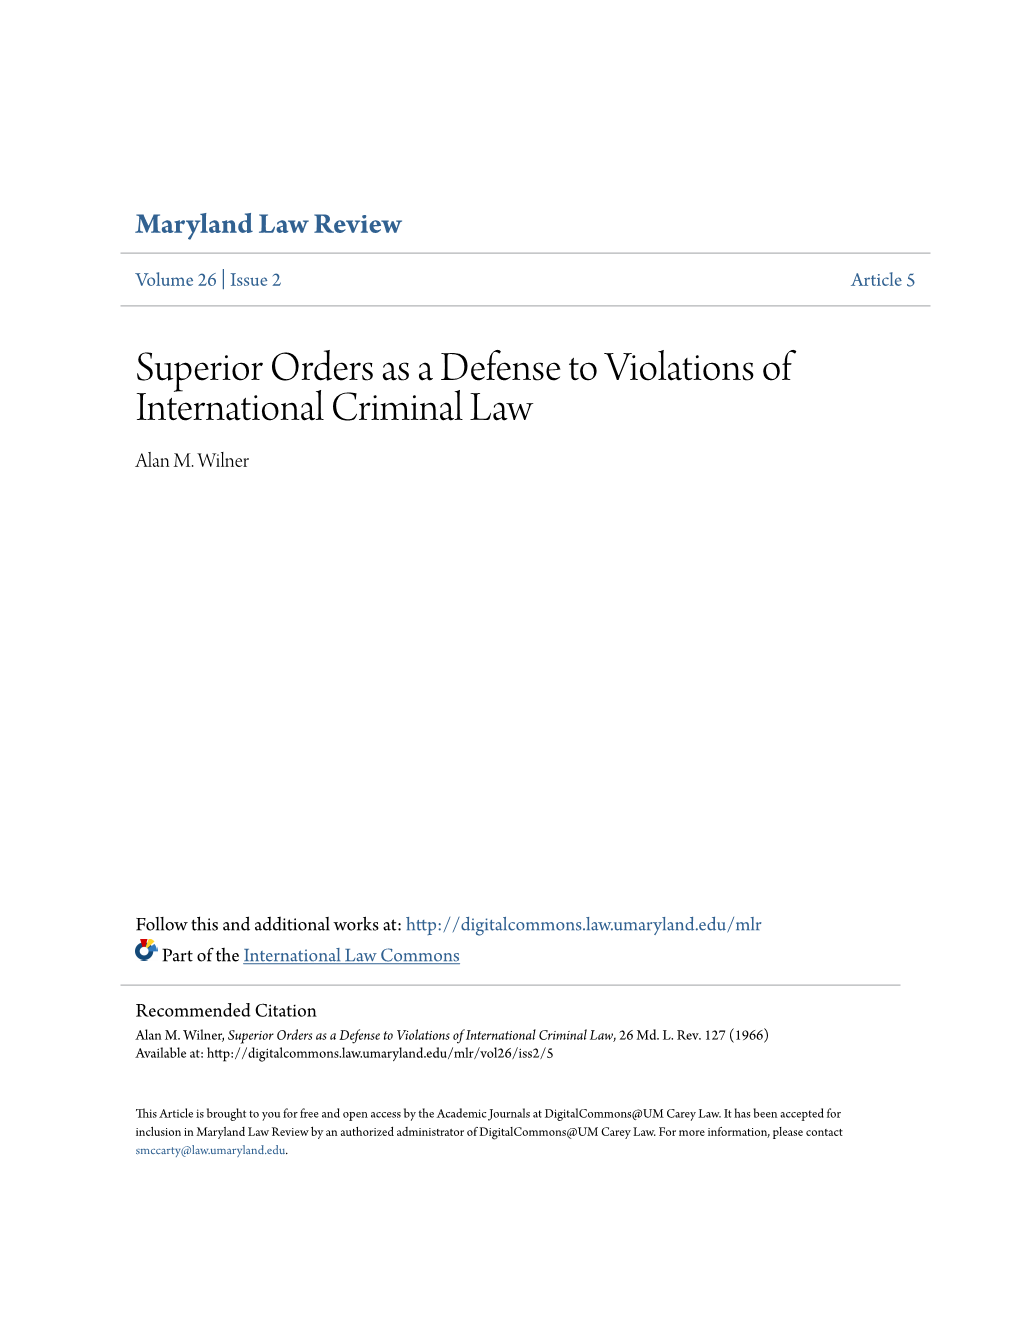 Superior Orders As a Defense to Violations of International Criminal Law Alan M